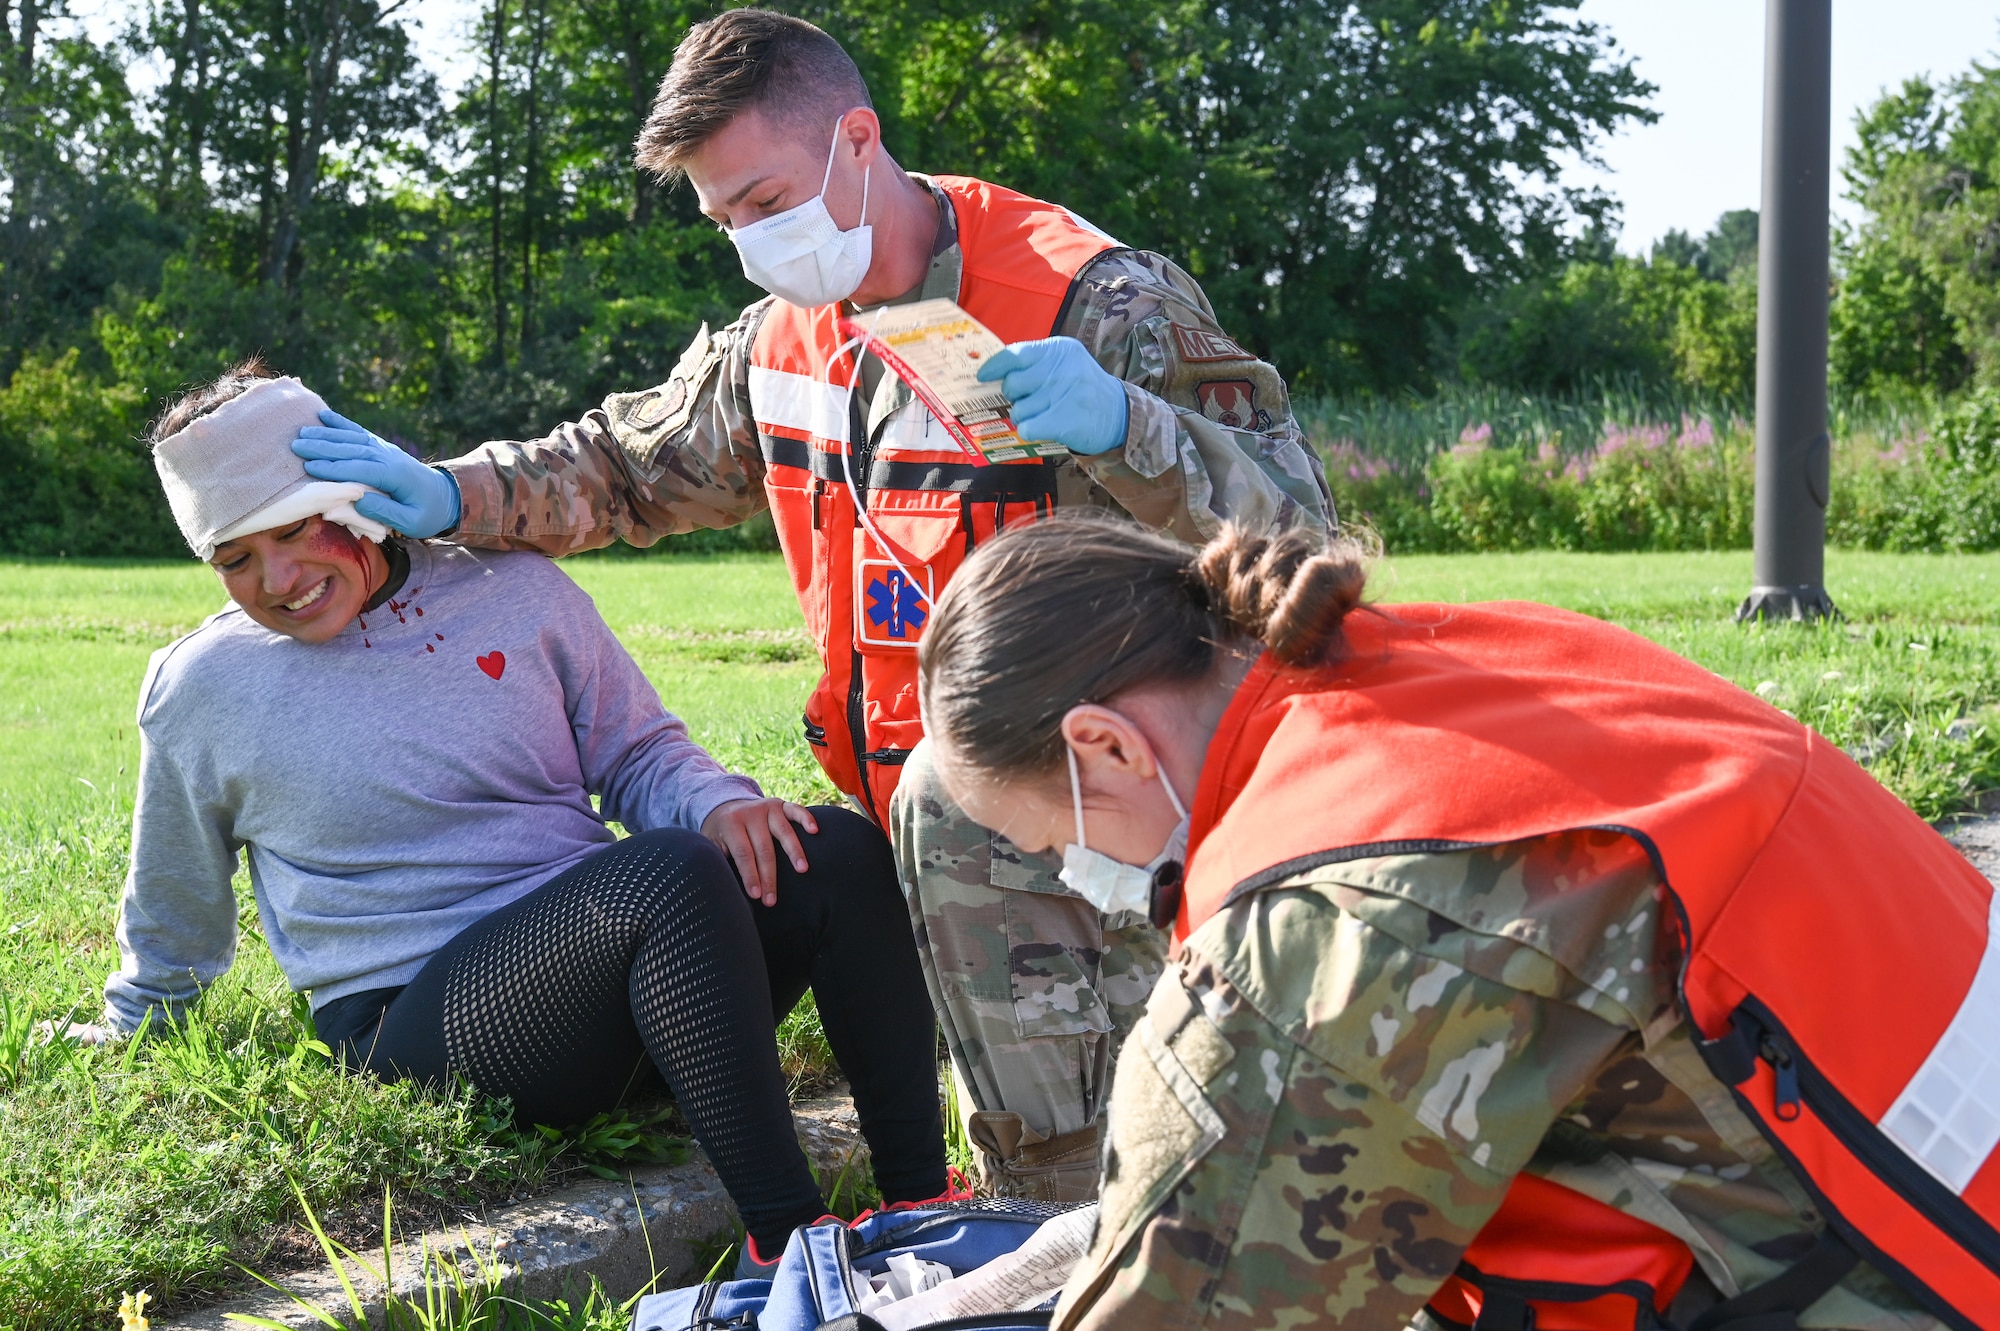 66th Medical Squadron Field Response Team members Tech. Sgts. William Trimble and Tatiana Lieback provide support to an injured role player, Tech. Sgt. Kelly Portillo, Air Force Life Cycle Management Center, Detachment 7 Commander Support Staff section chief, during a Ready Eagle exercise at Hanscom Air Force Base, Mass., July 30. Fifty volunteers from installations around New England donned moulage injuries to authenticate the training. (U.S. Air Force photo by Todd Maki)